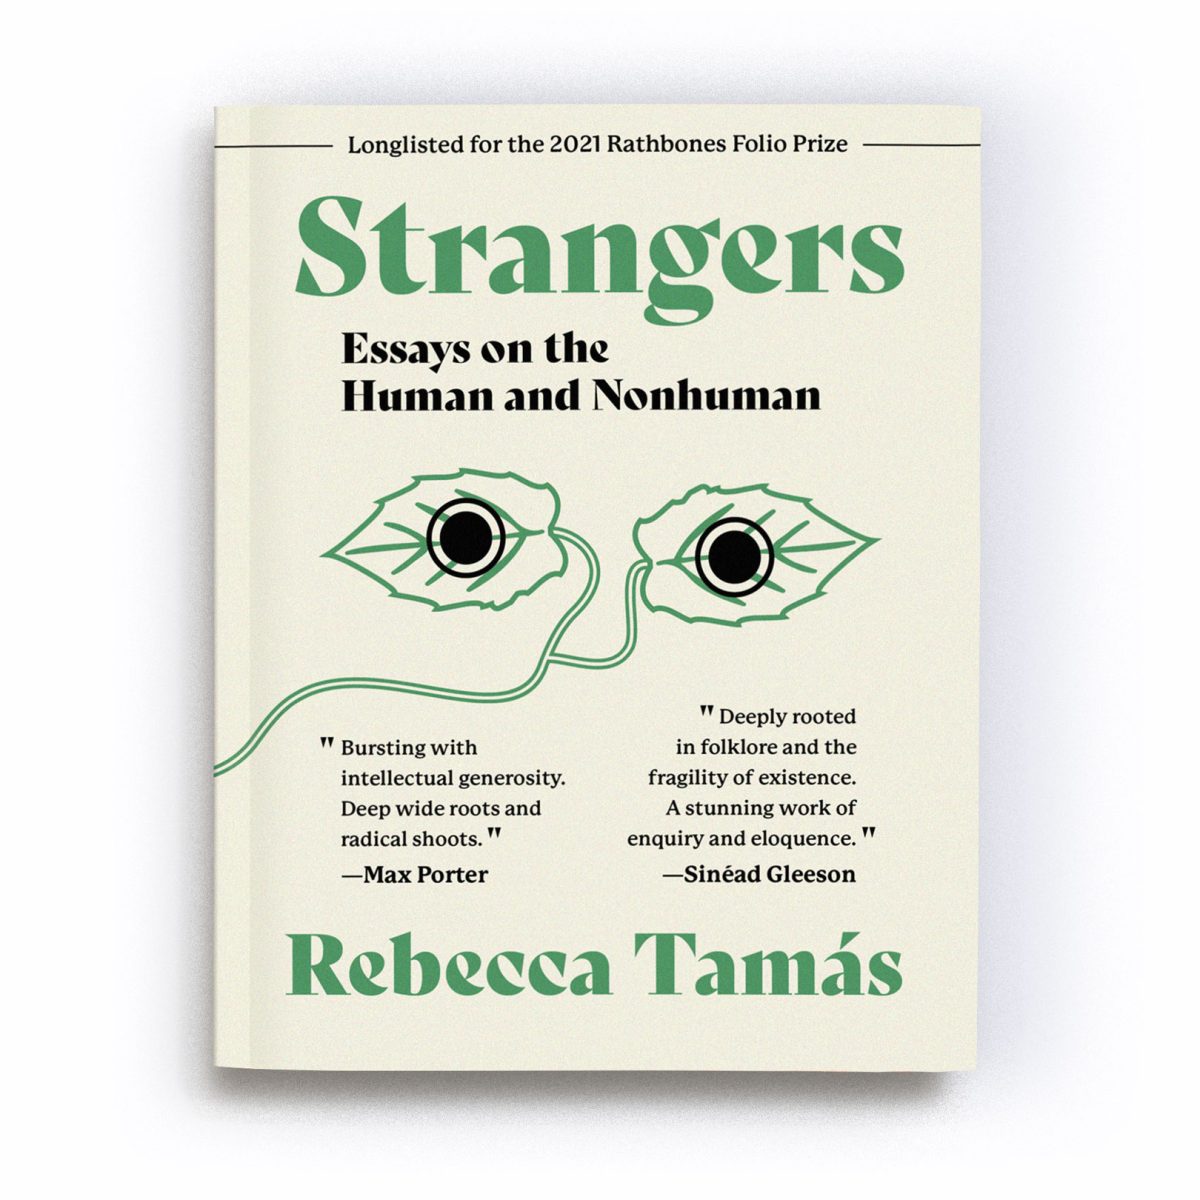 A render of the Expanded Edition of the book ‘Strangers: Essays on the Human and Nonhuman’. Along the top of the cover runs text that reads “Longlisted for the 2021 Rathbones Folio Prize”. In the centre of the cover is an abstract motif of two green leaves, joined by a stalk which winds from the centre to the bottom left of the cover. A black filled circle, outlined with a ring, overlays each leaf, giving the impression the leaves are a pair of eyes staring out at us from the cover. A quote by Max Porter reads “Bursting with intellectual generosity. Deep wide roots and radical shoots”, alongside a quote by Sinéad Gleeson which reads: 'Tamás’ essays are deeply rooted in folklore and the fragility of existence. A stunning work of enquiry and eloquence.' The text is a mixture of black and green in colour and is placed on an unbleached cotton-coloured background.